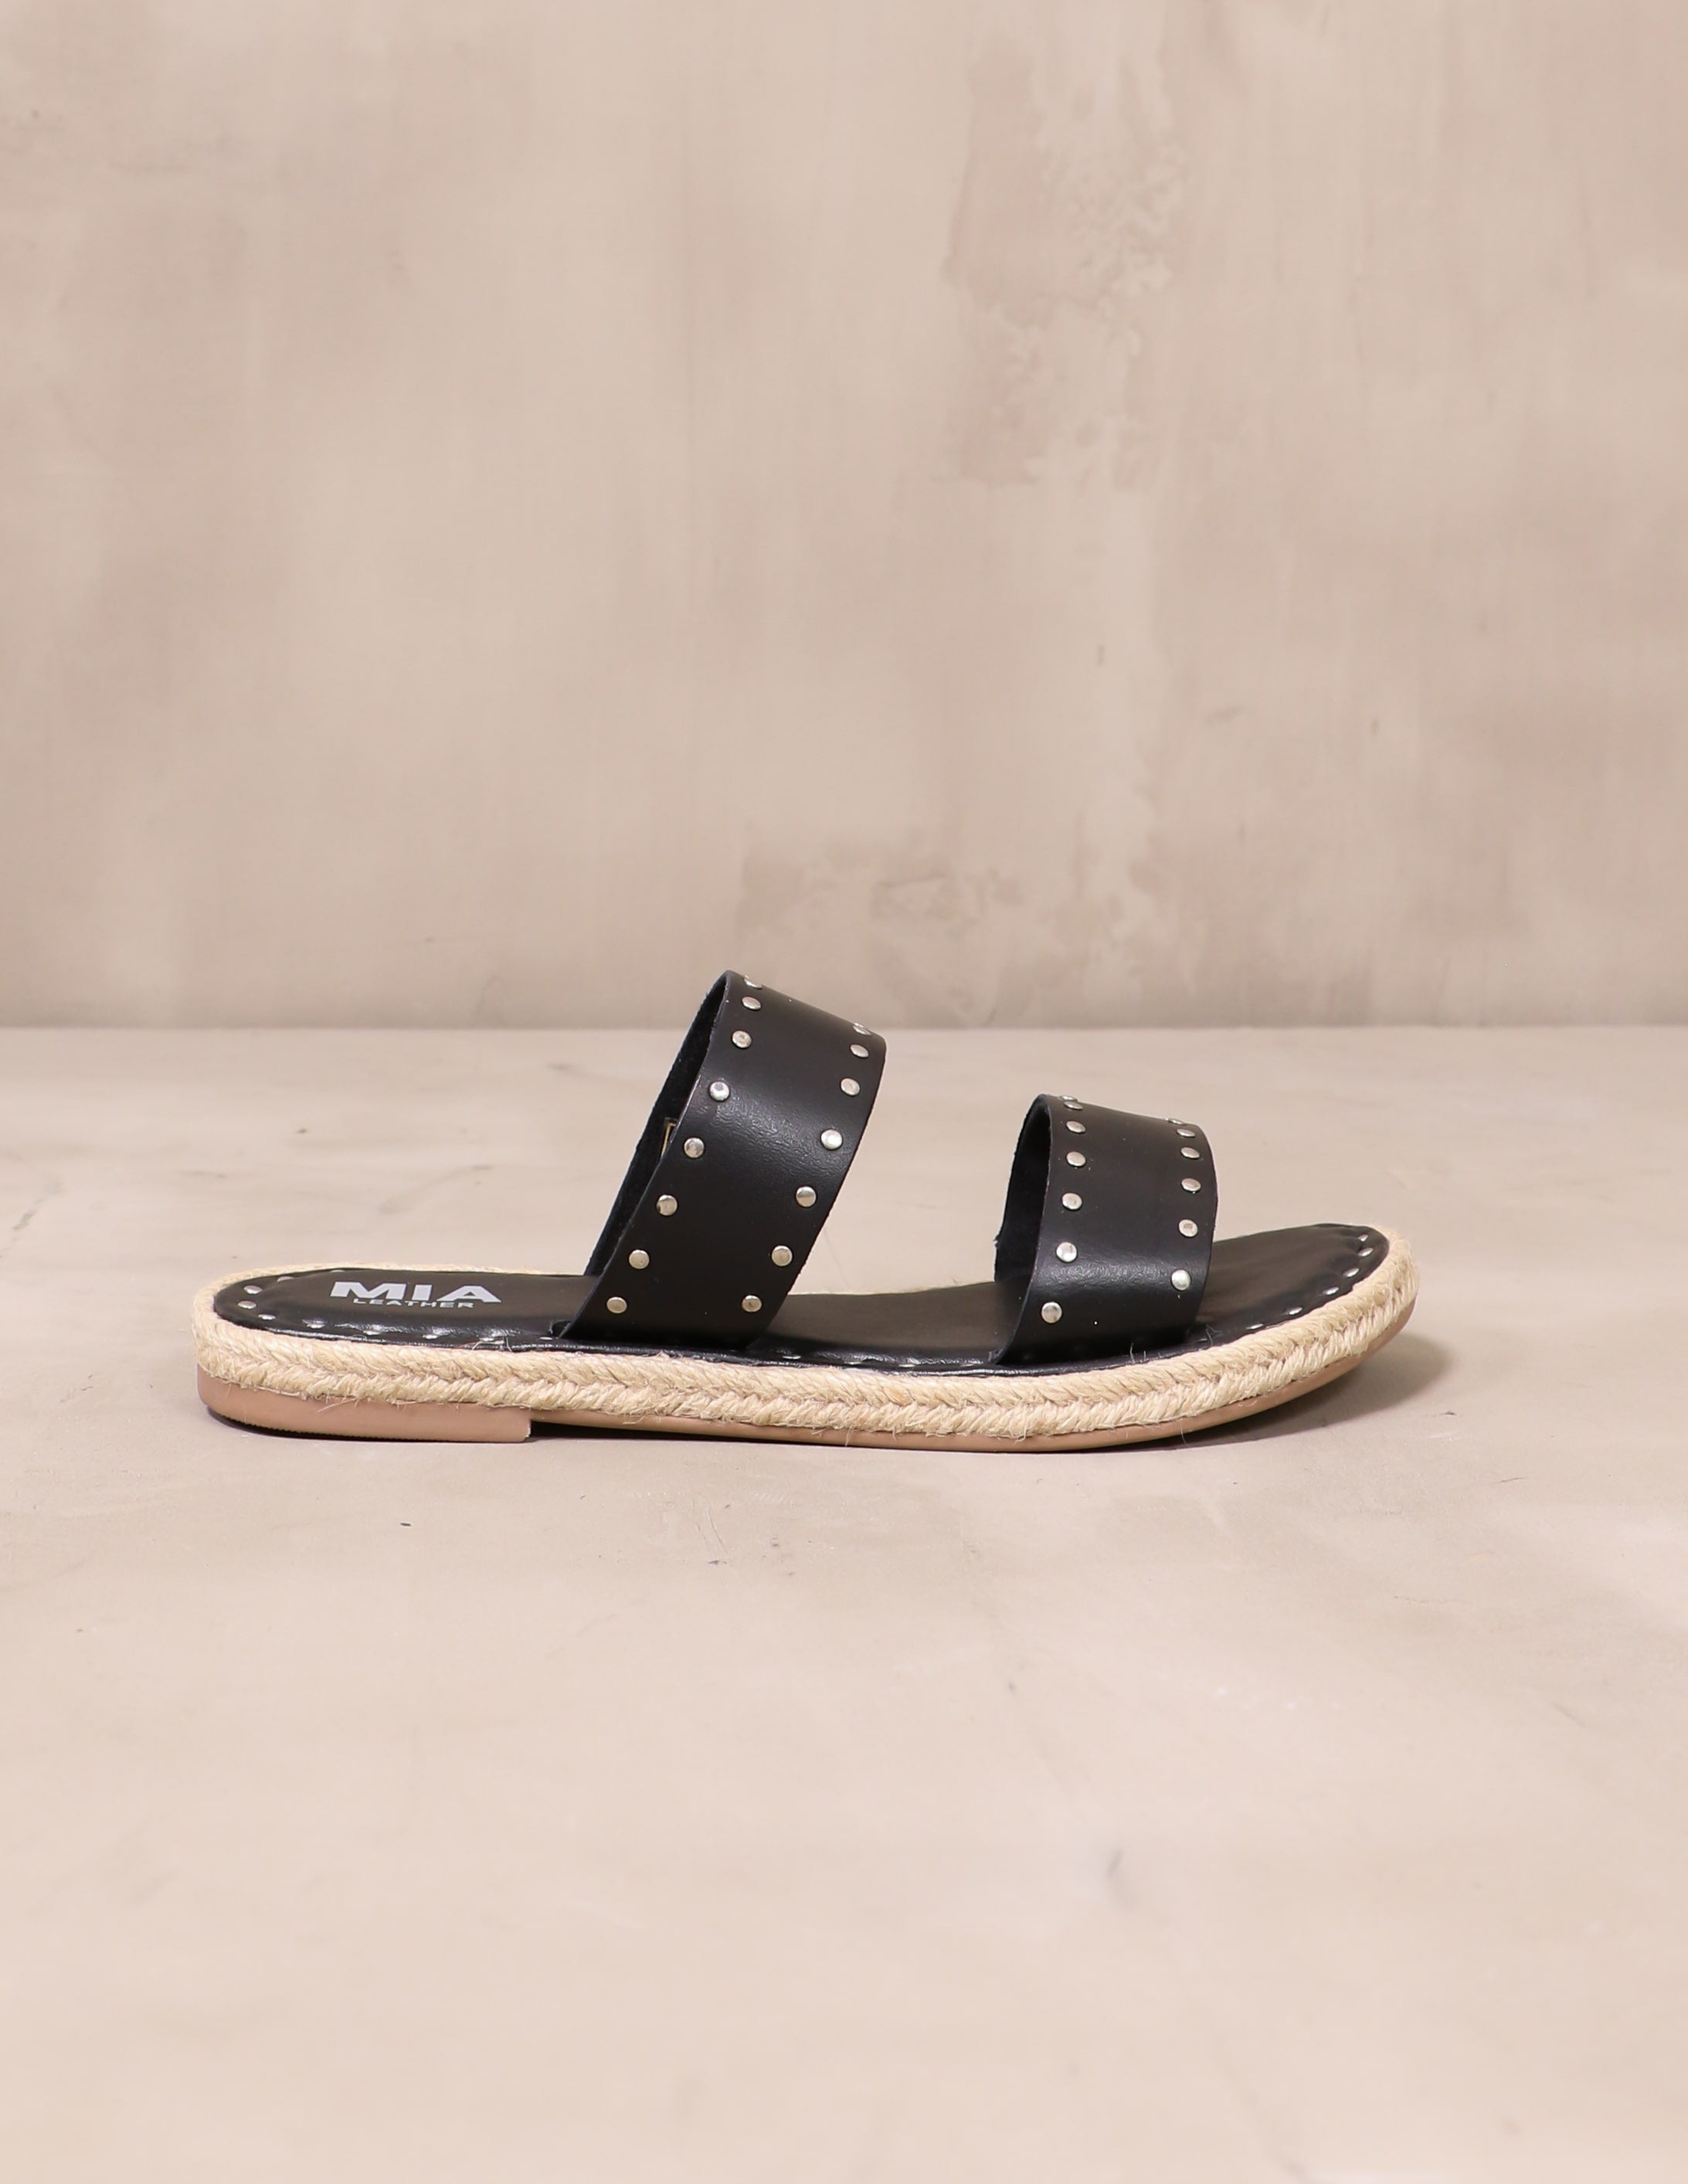 black let the stud times roll sandal on cement background